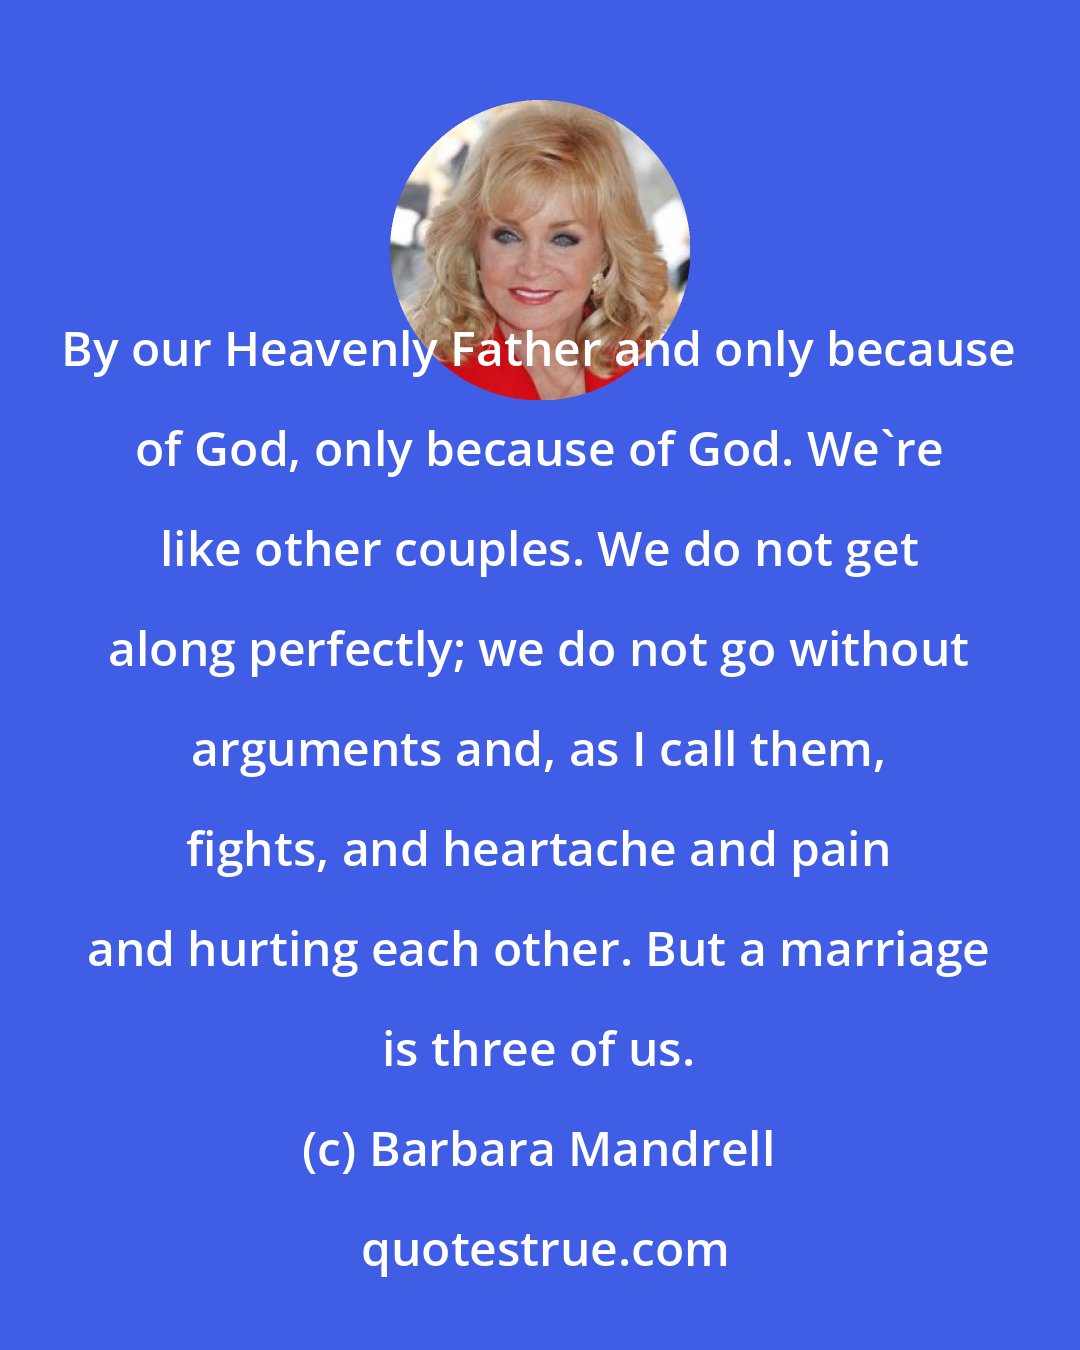 Barbara Mandrell: By our Heavenly Father and only because of God, only because of God. We're like other couples. We do not get along perfectly; we do not go without arguments and, as I call them, fights, and heartache and pain and hurting each other. But a marriage is three of us.